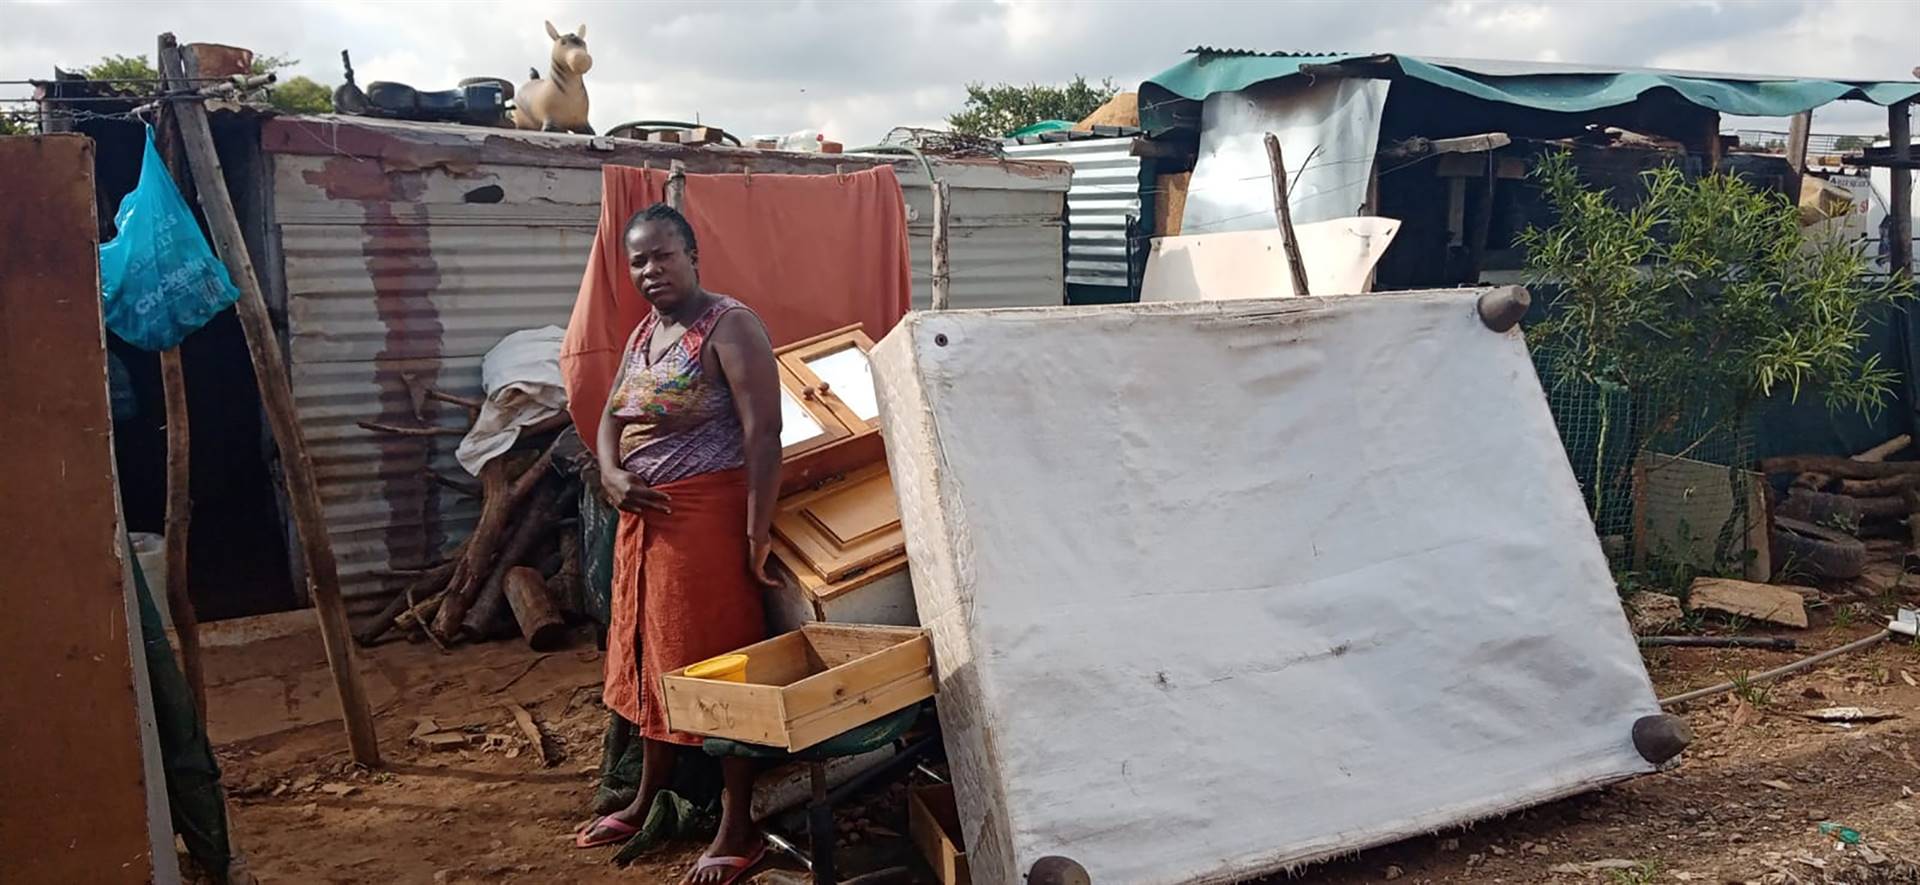 Eustina Mutukwa's husband wants his R6000 lobola back, community leaders took out his furniture since he was pestering her. Photo by Karabo Rammutla